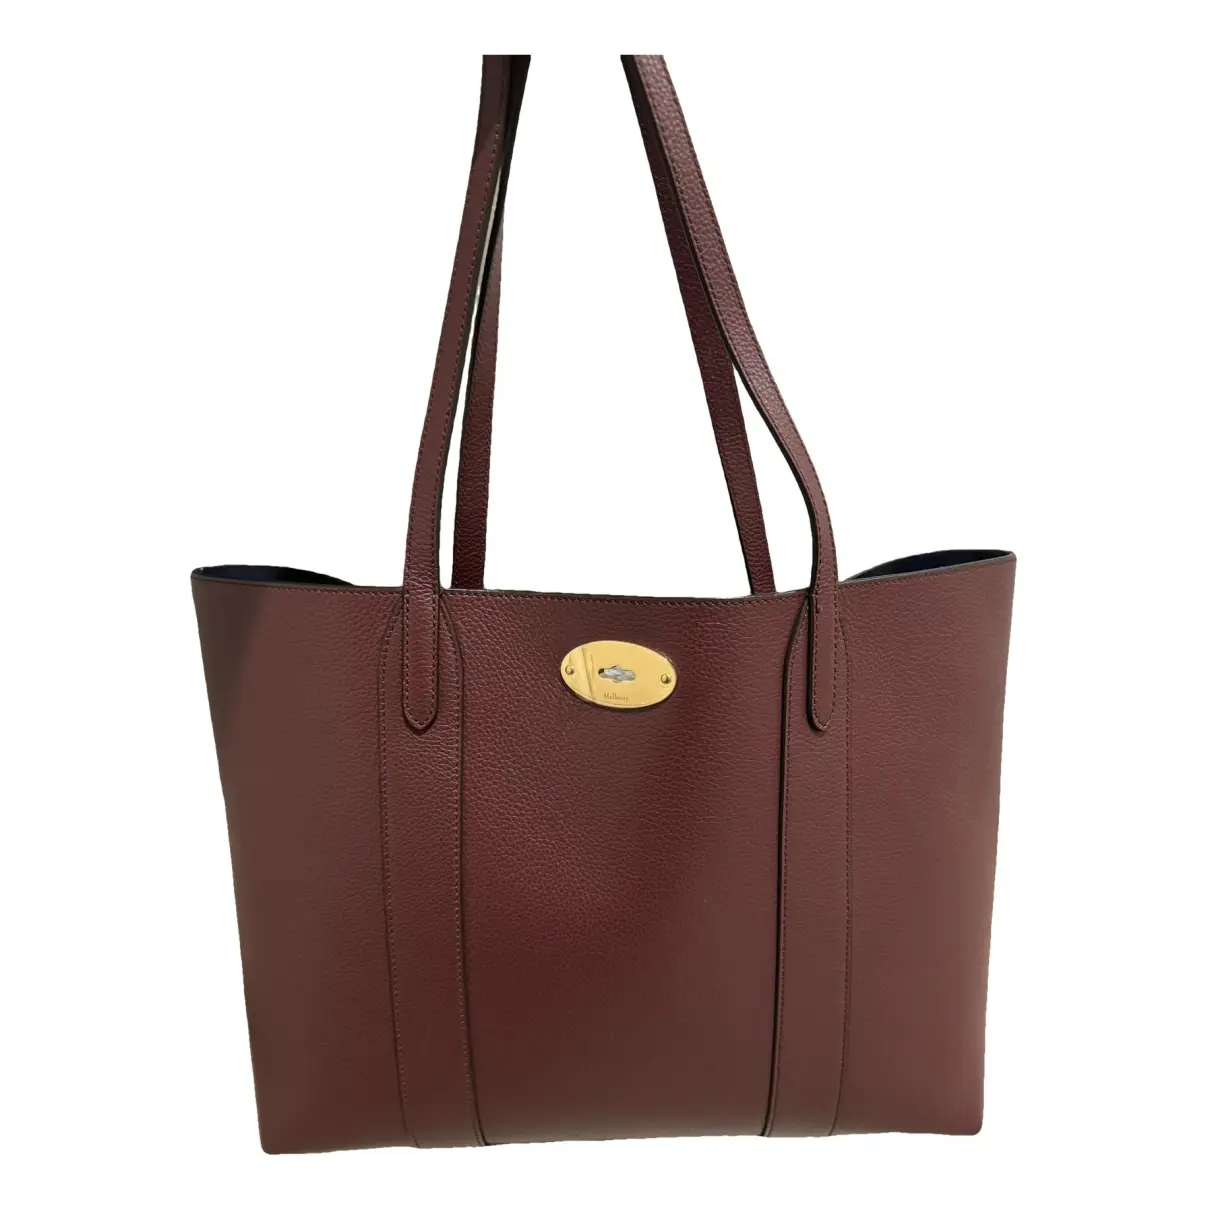 Bayswater tote leather tote